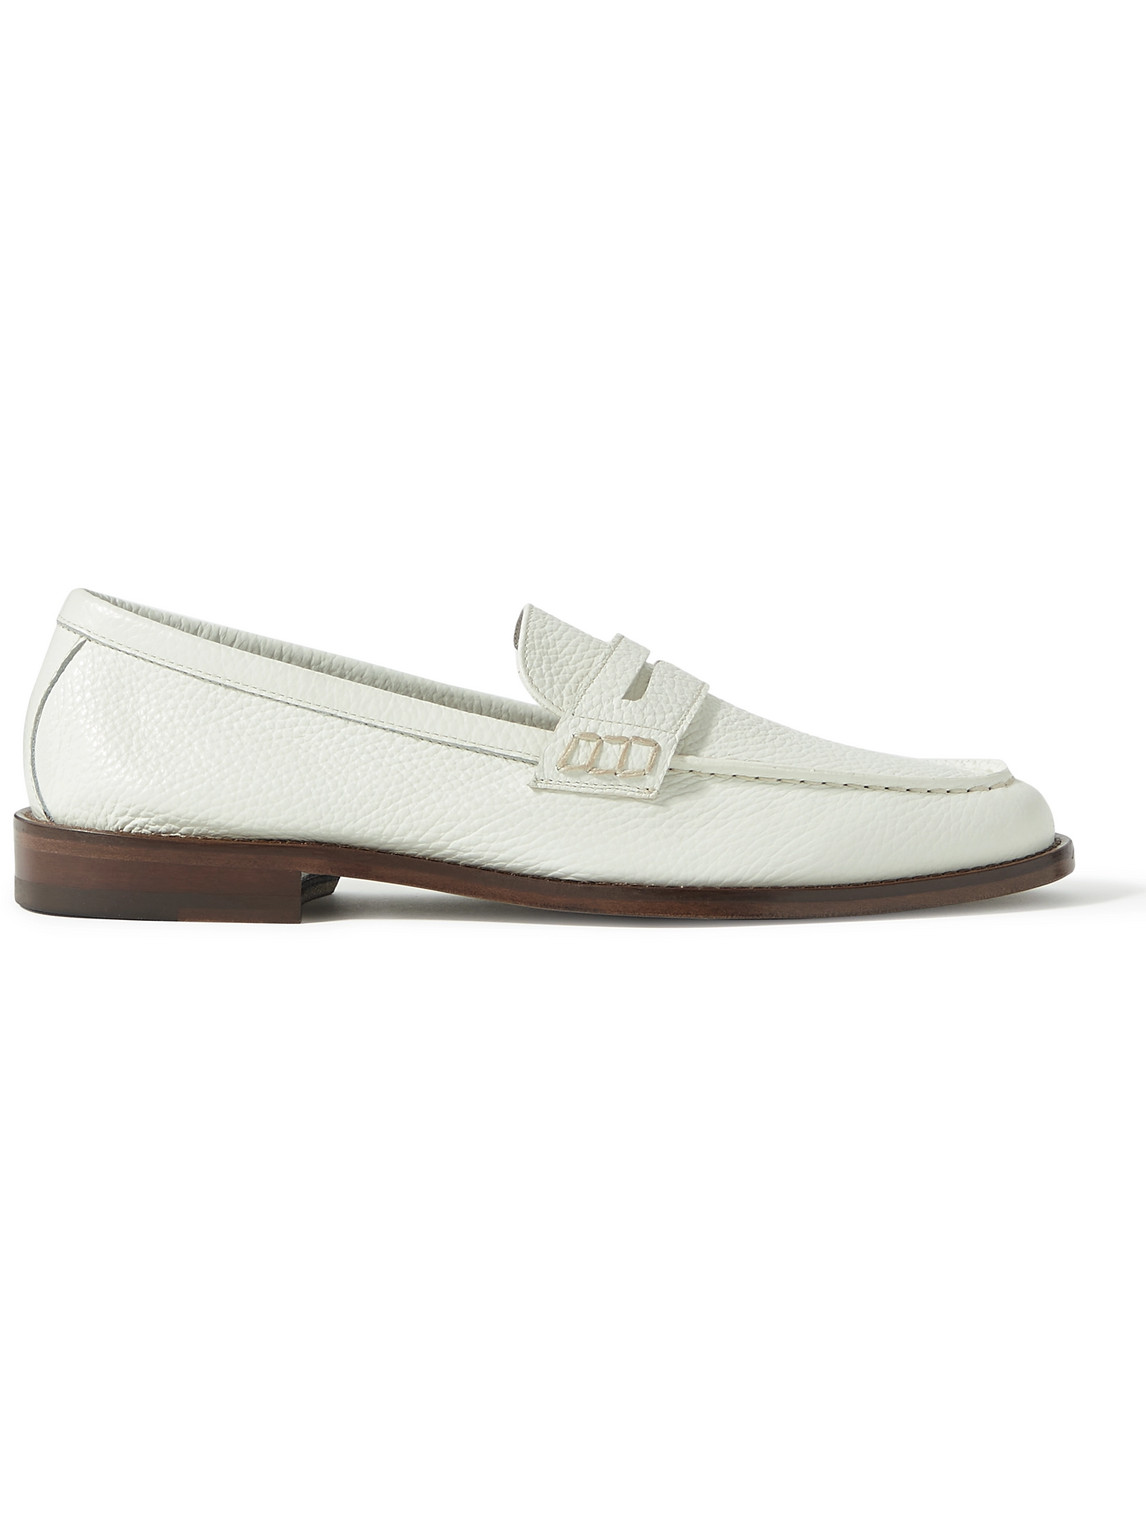 Manolo Blahnik Perry Full-Grain Leather Penny Loafers